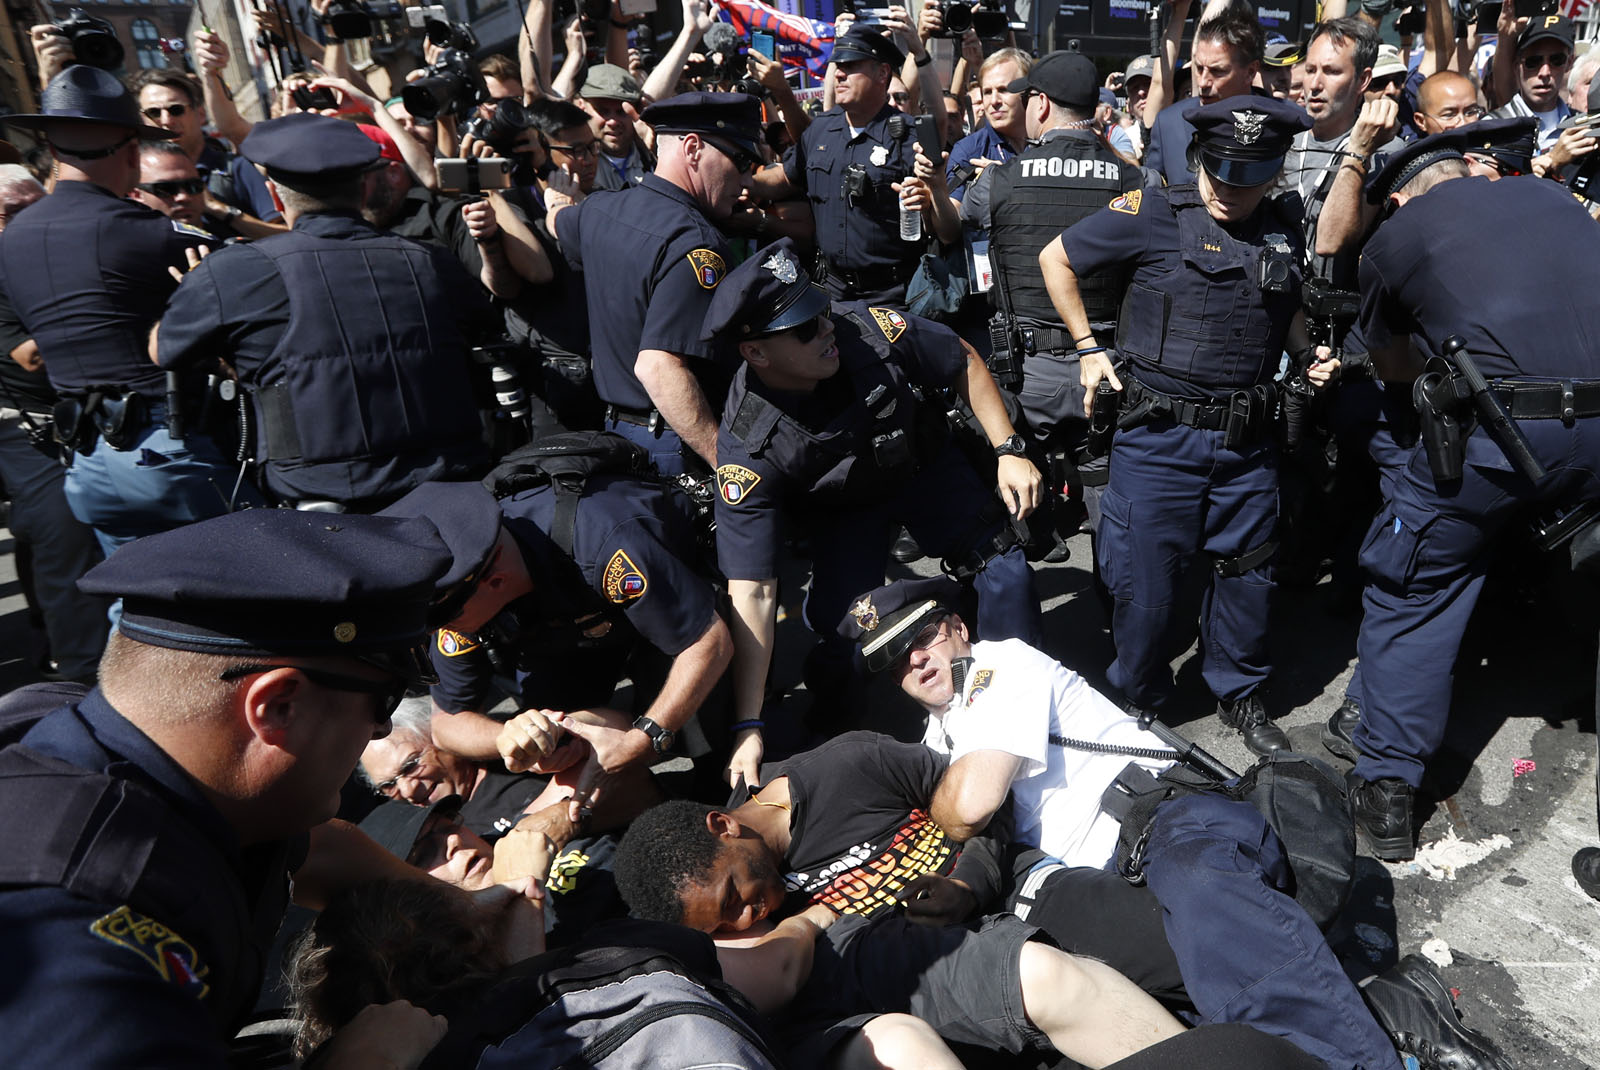 Police and protesters fall to ground during demonstration, Wednesday, July 20, 2016, in Cleveland, during the third day of the Republican convention. (AP Photo/John Minchillo)